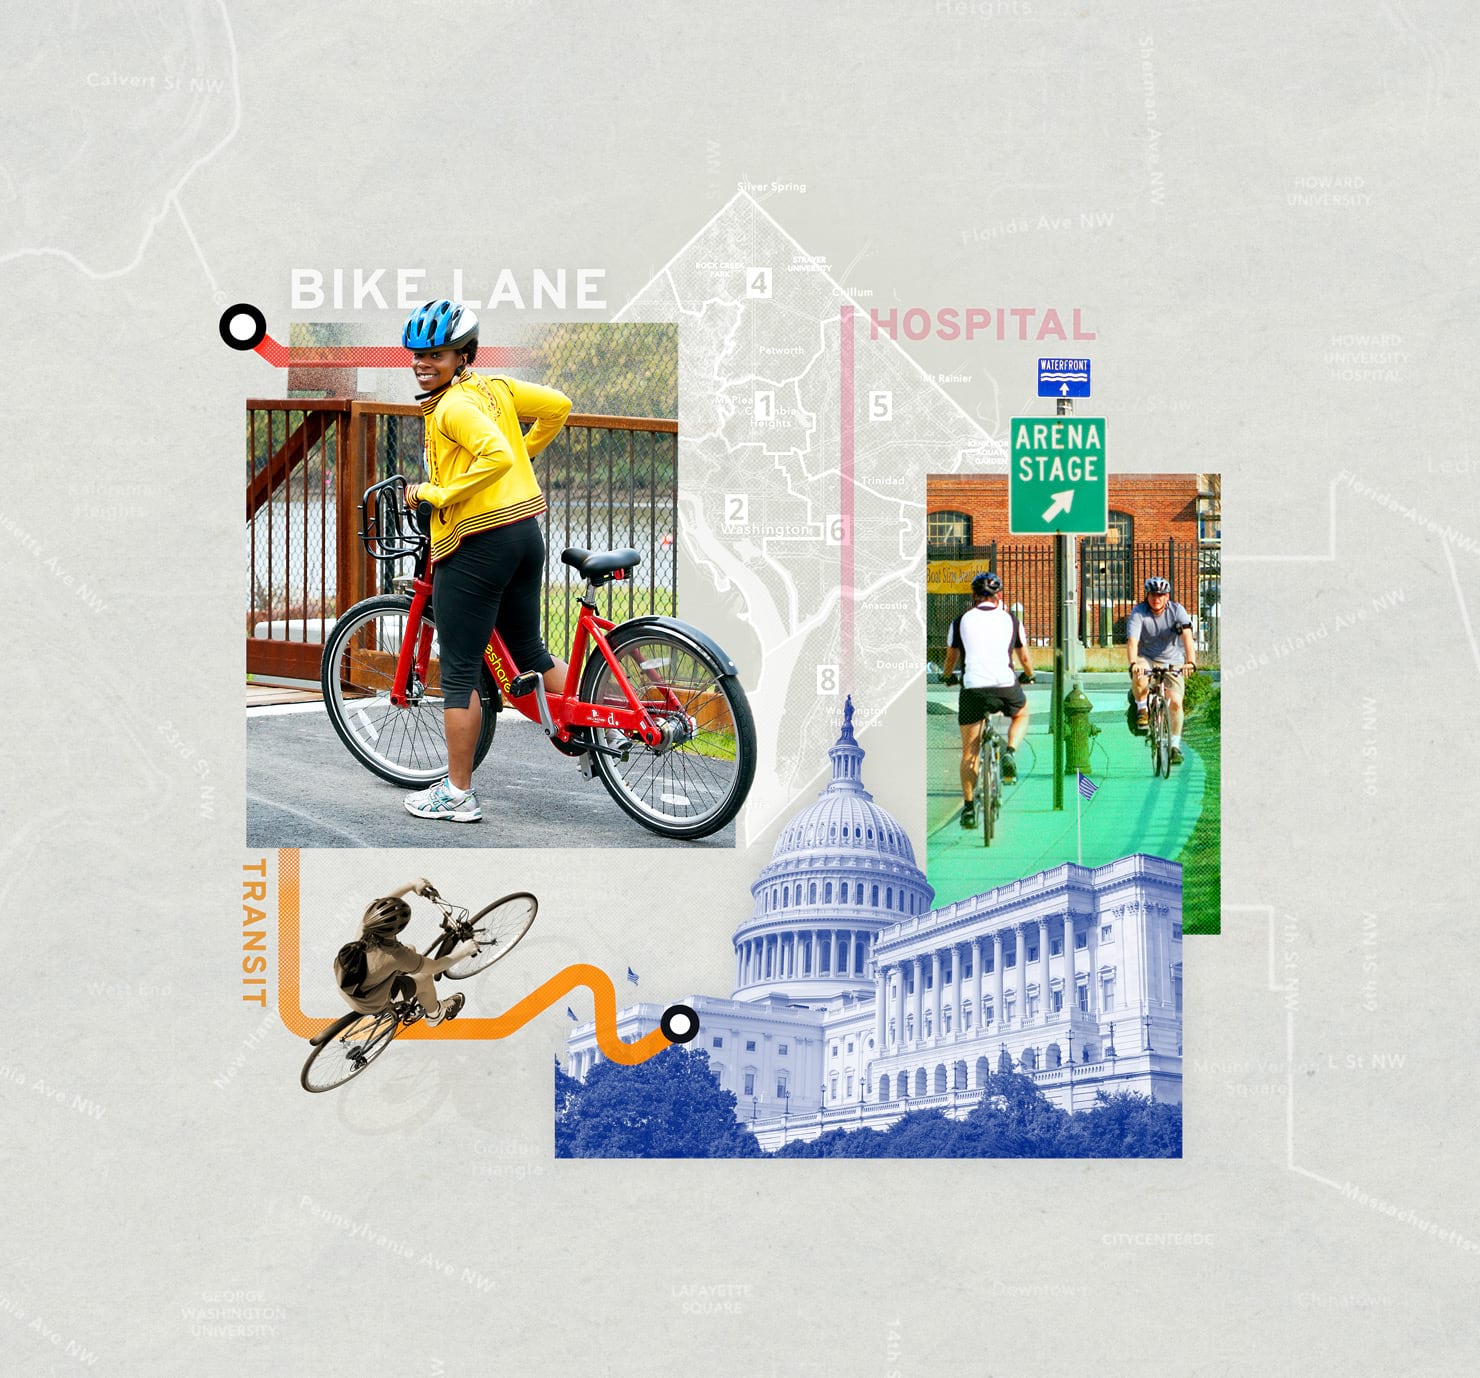 Image of bicyclist and graphics.